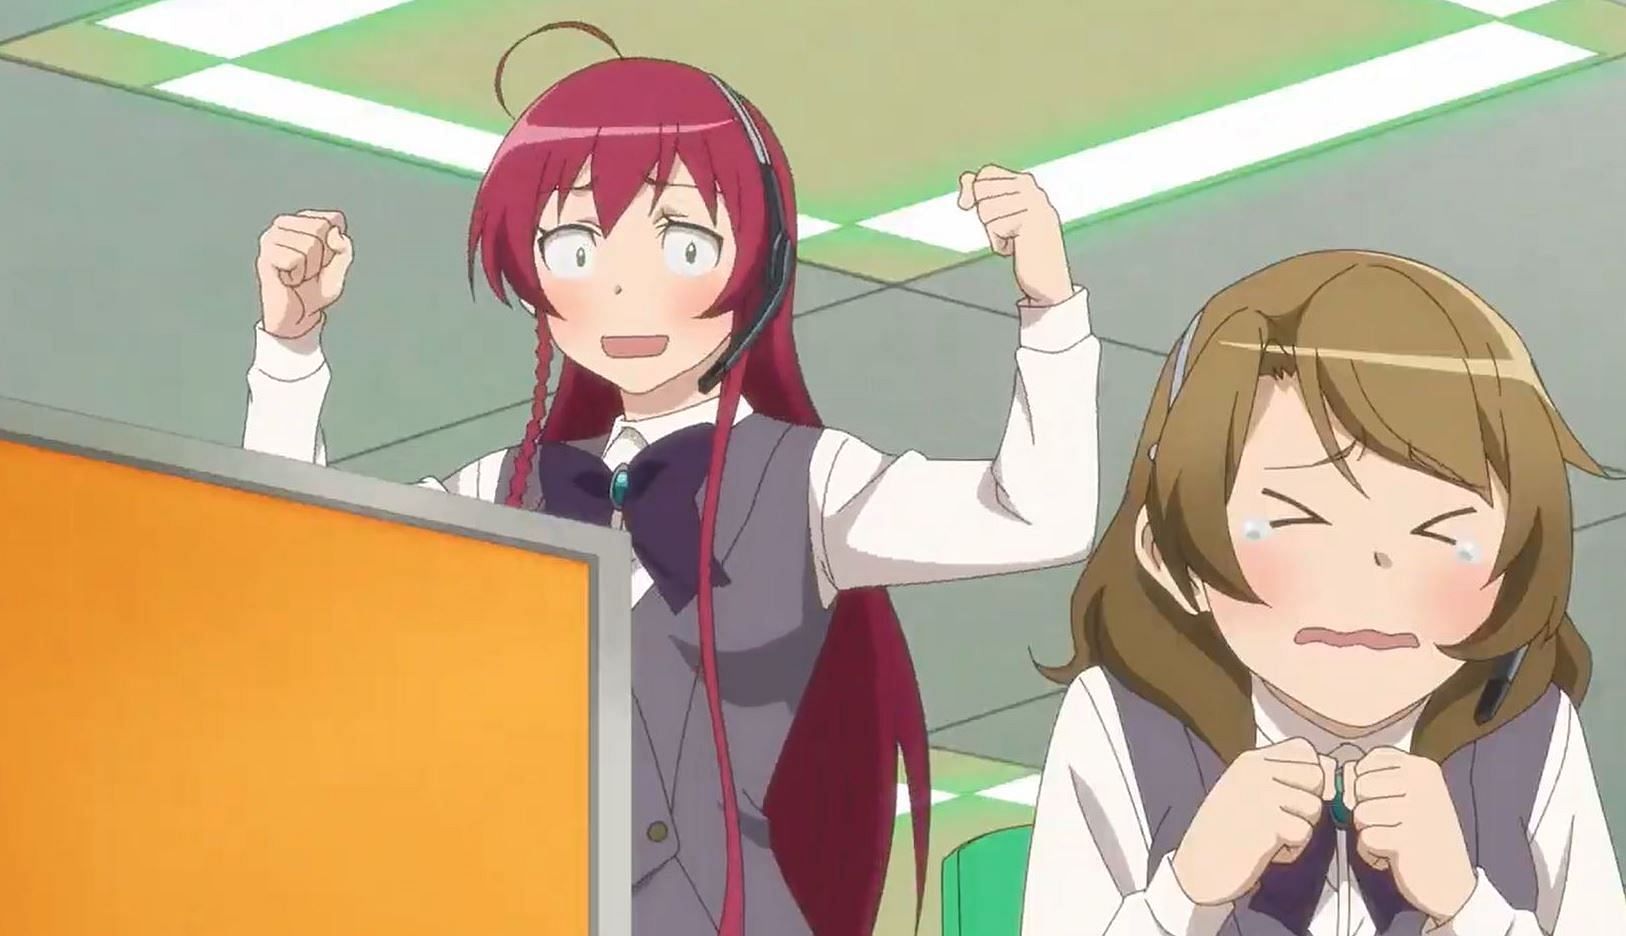 Emilia shouting at her workplace in The Devil is a Part-Timer!! (Image via Studio 3Hz)